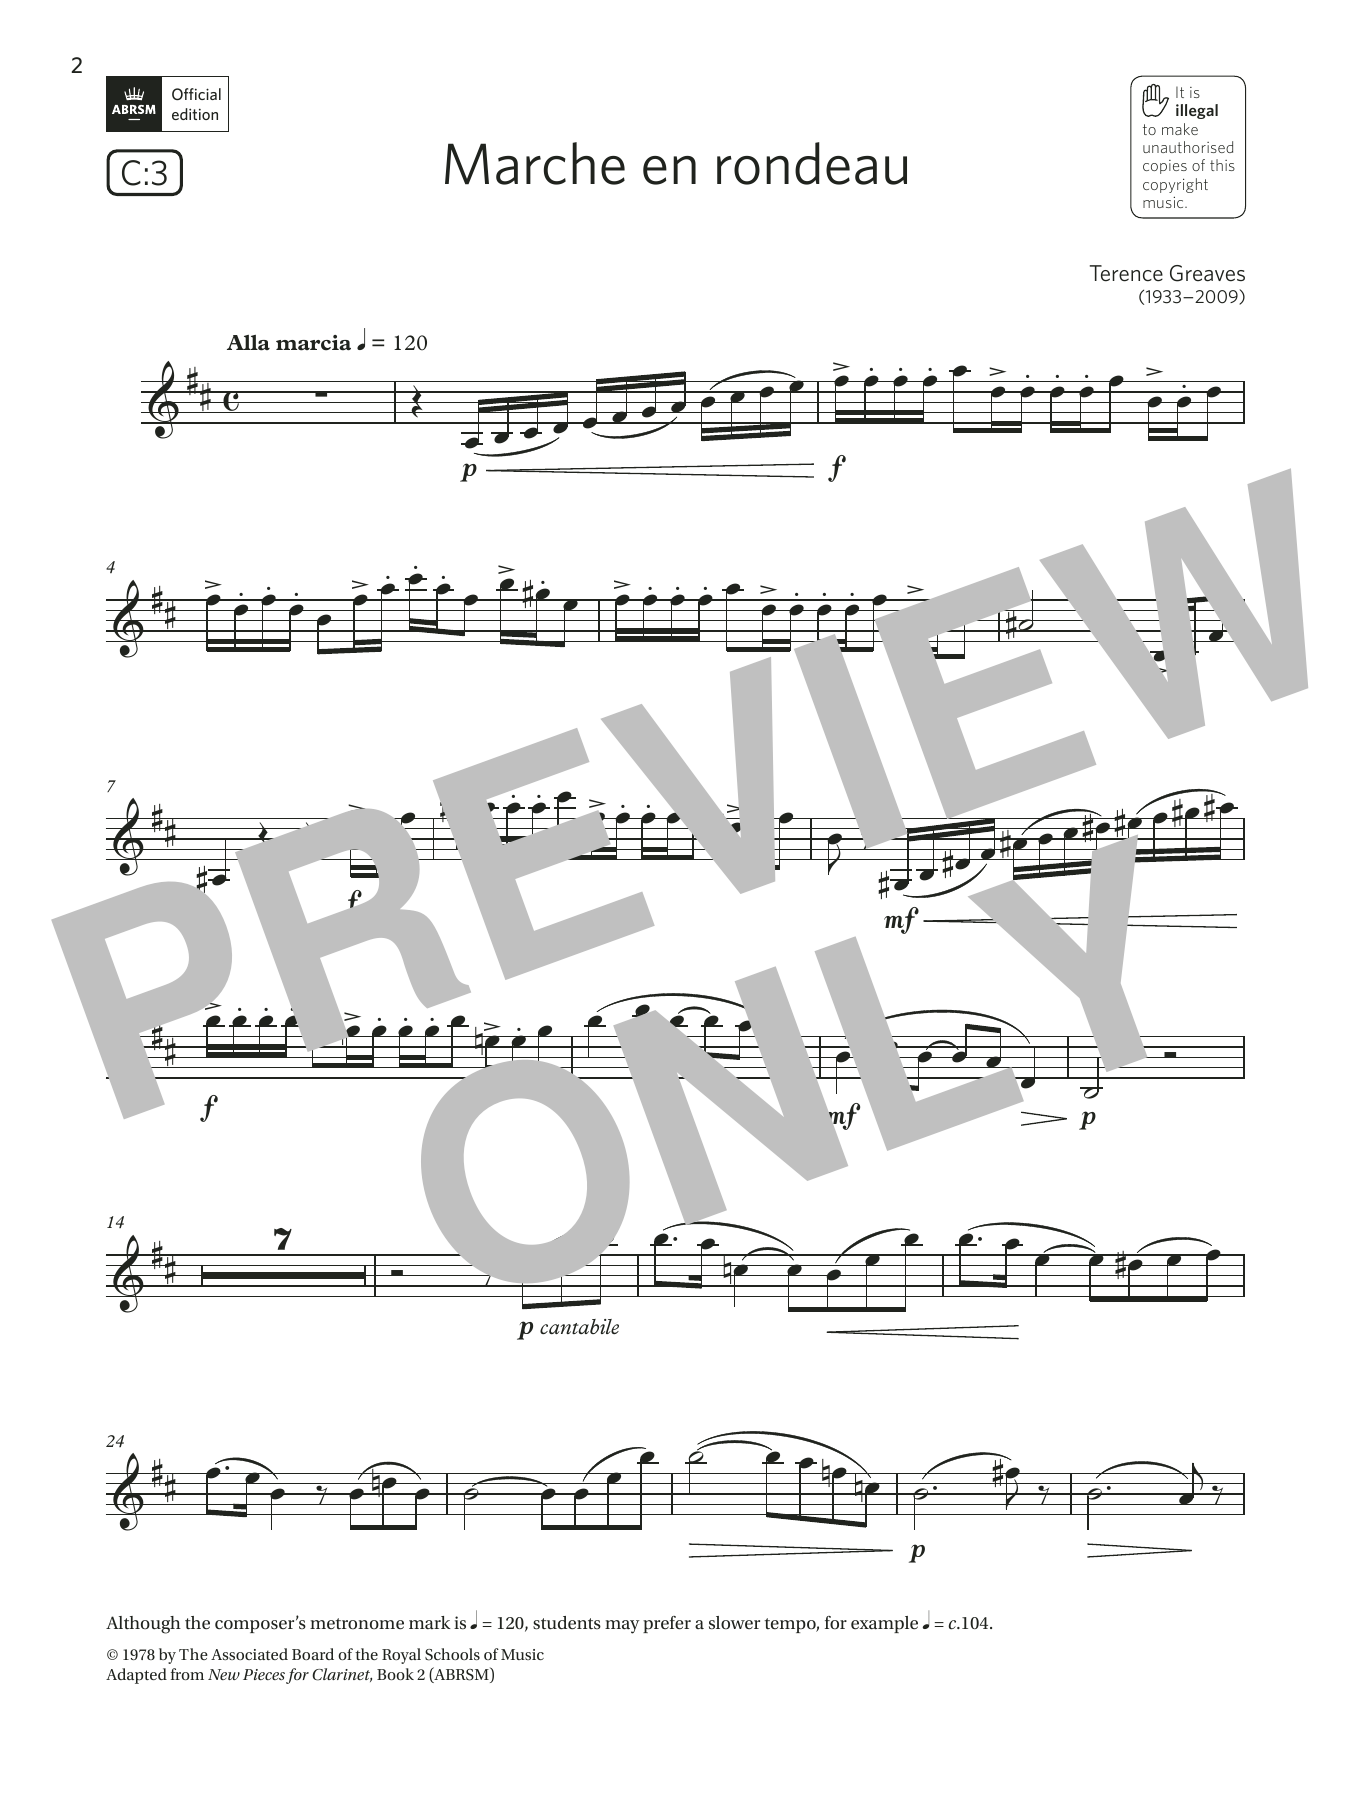 Download Terence Greaves Marche en rondeau (Grade 6 List C3 from Sheet Music